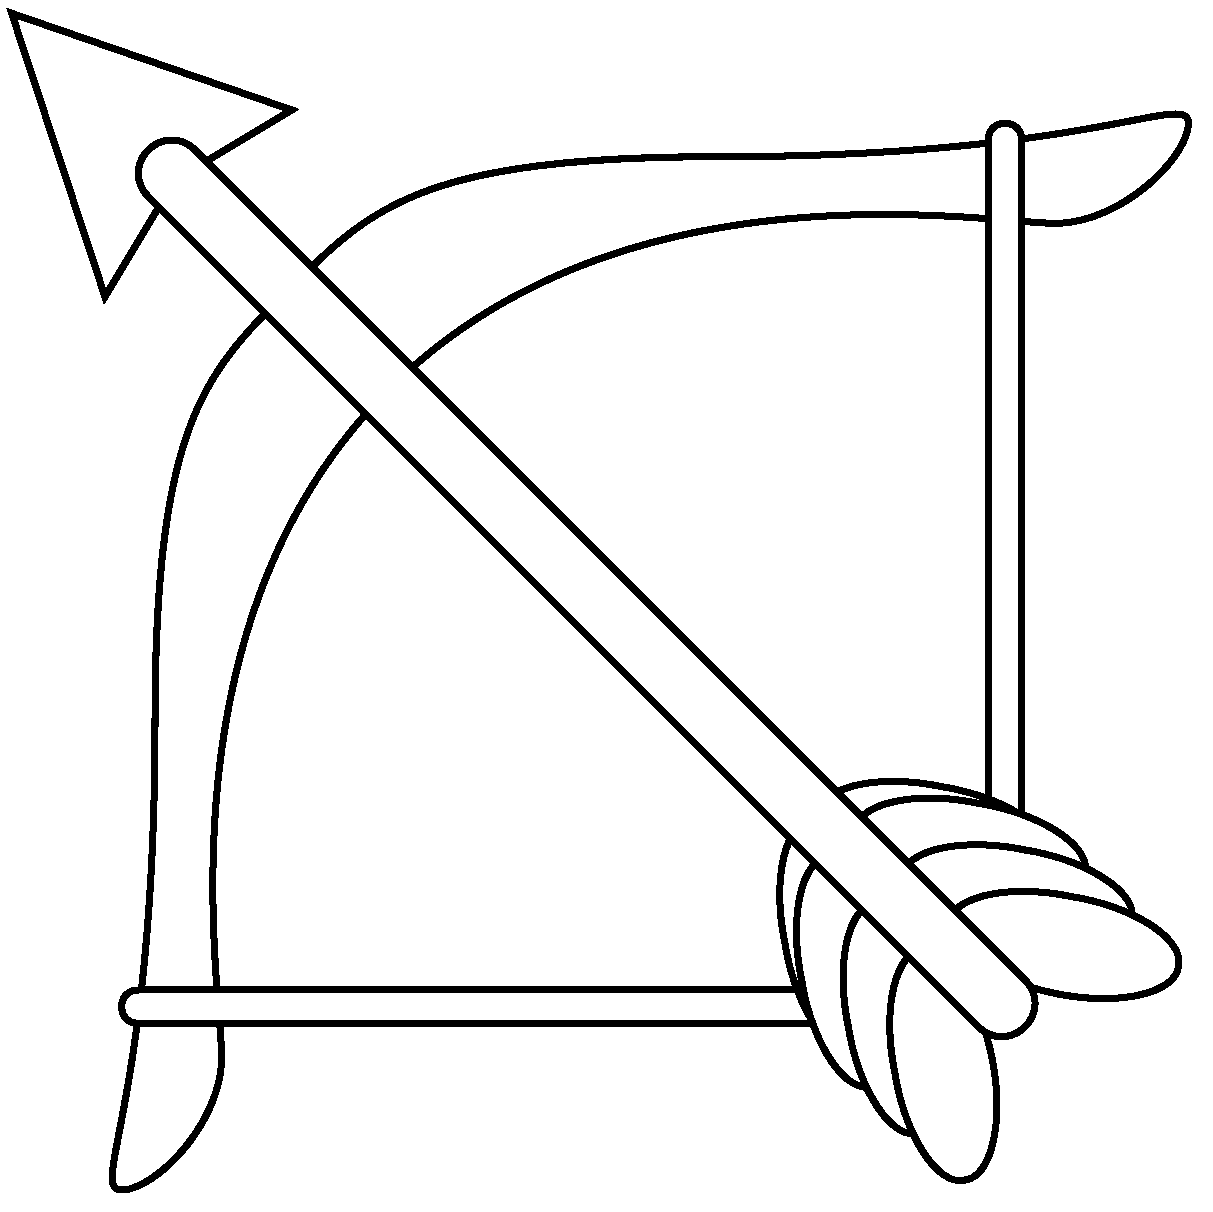 Bow And Arrow Picture For Children